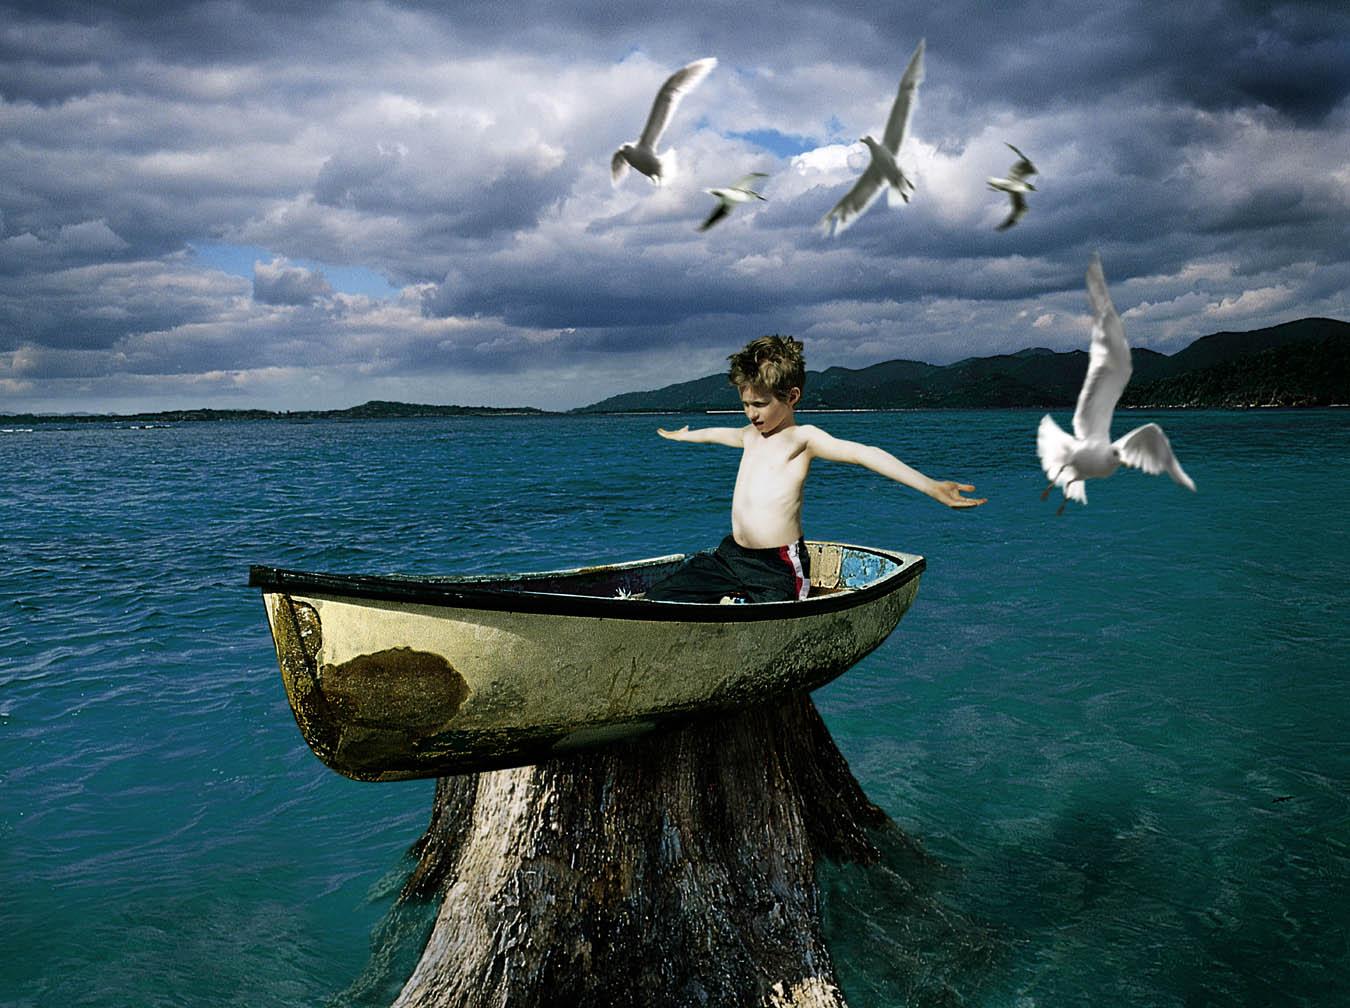 Aground - Photograph by Tom Chambers